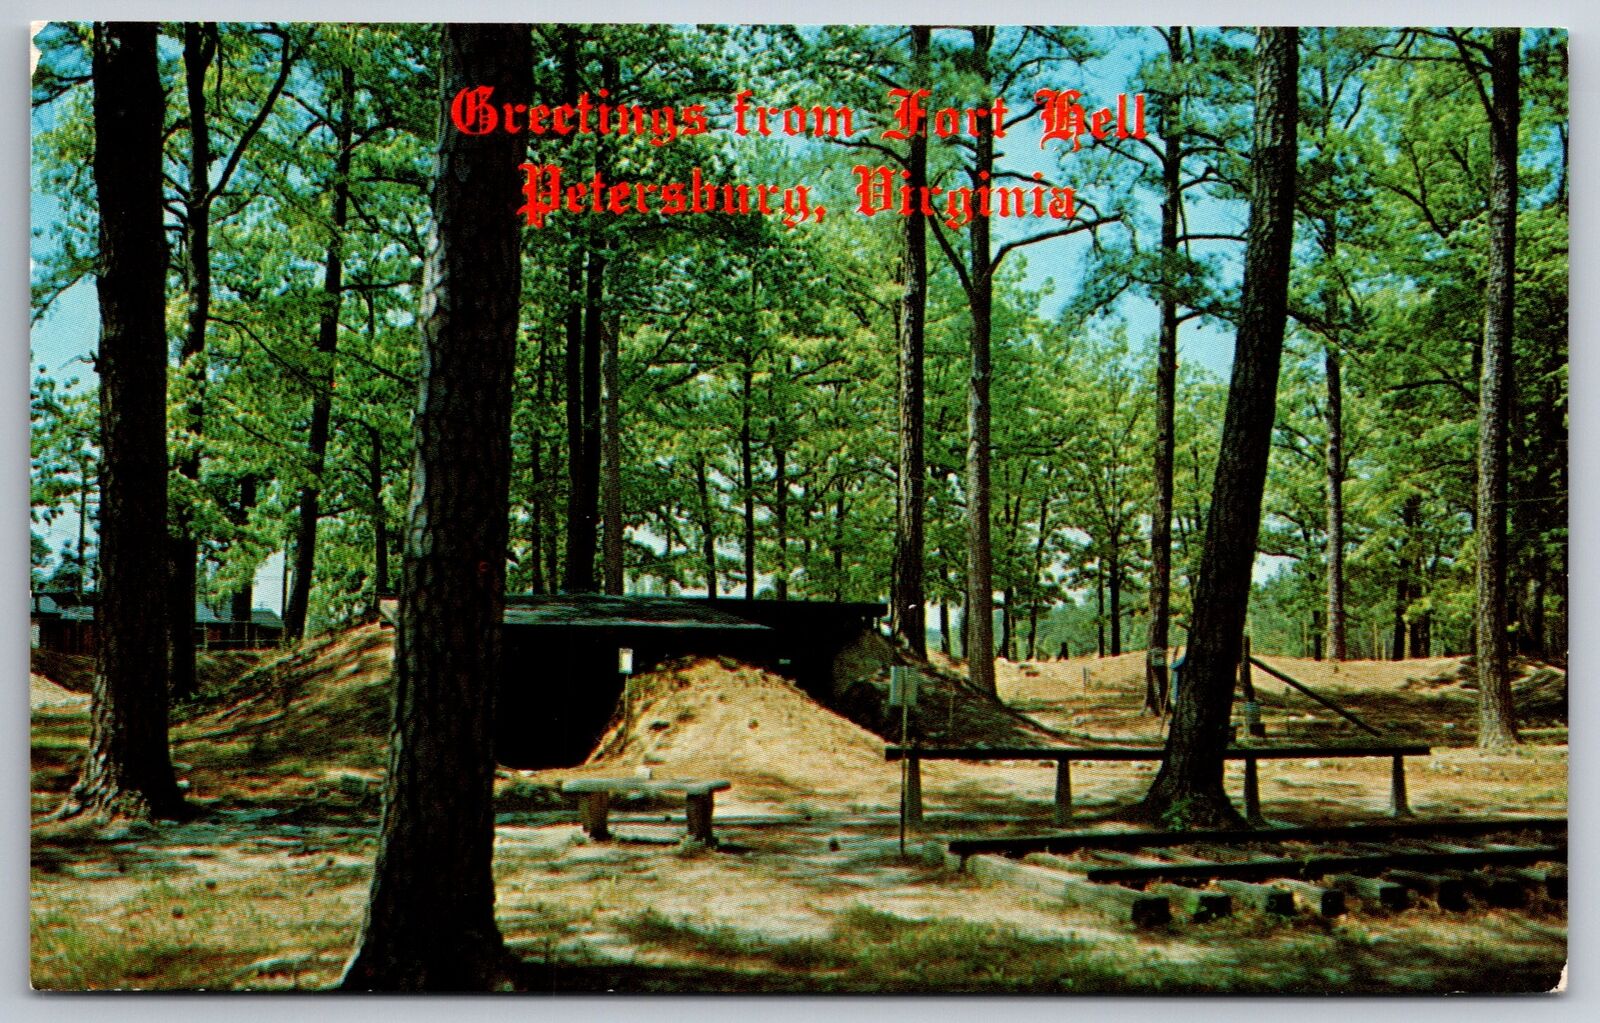 Petersburg Virginia~Roadside Fort Hell~Union Army Structure~US Hwy 301~1960s PC